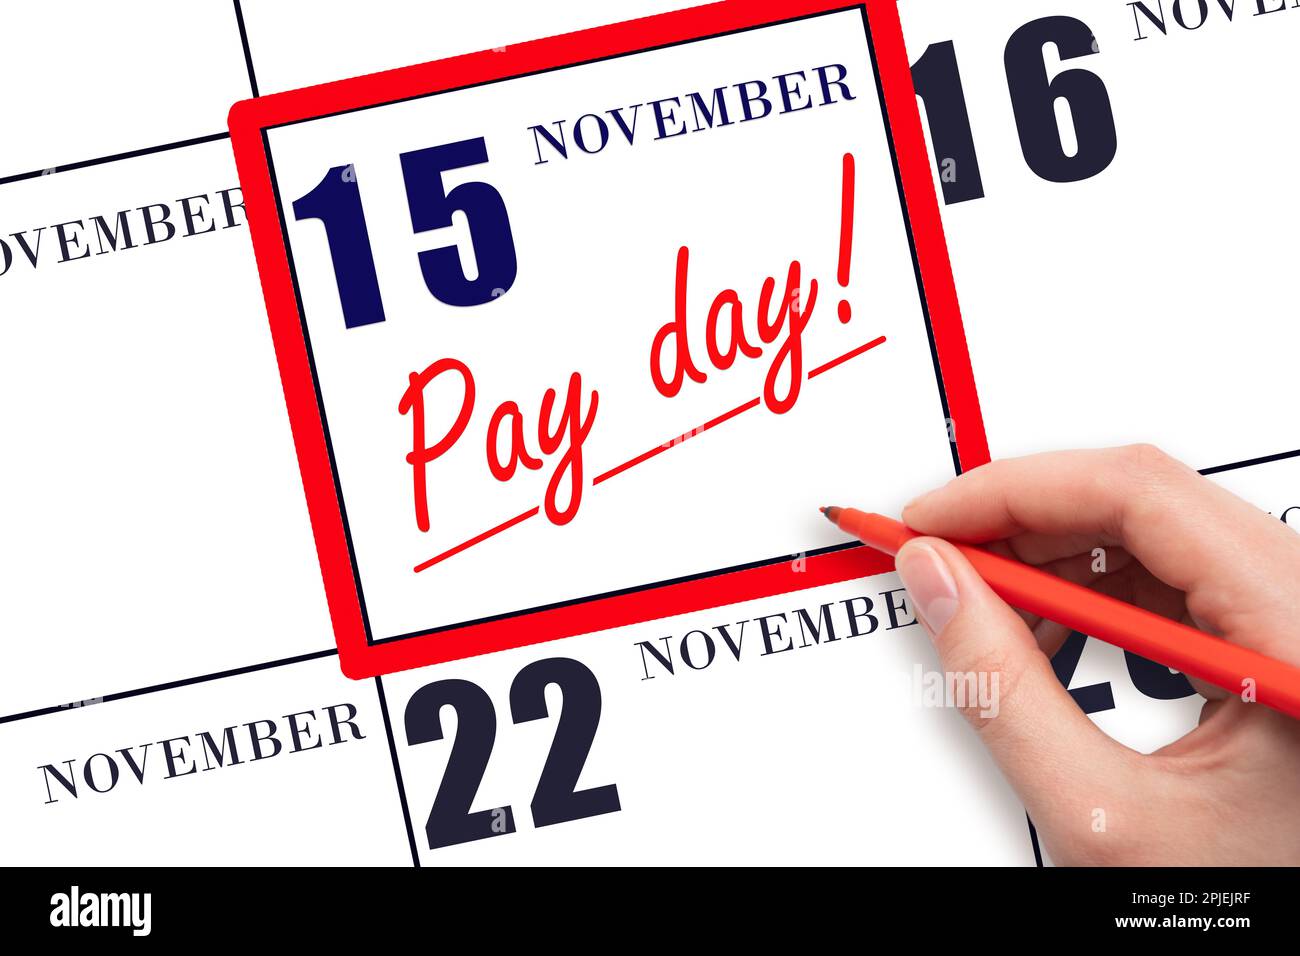 15th day of November. Hand writing text PAY DATE on calendar date November 15 and underline it. Payment due date. Reminder concept of payment. Autumn Stock Photo